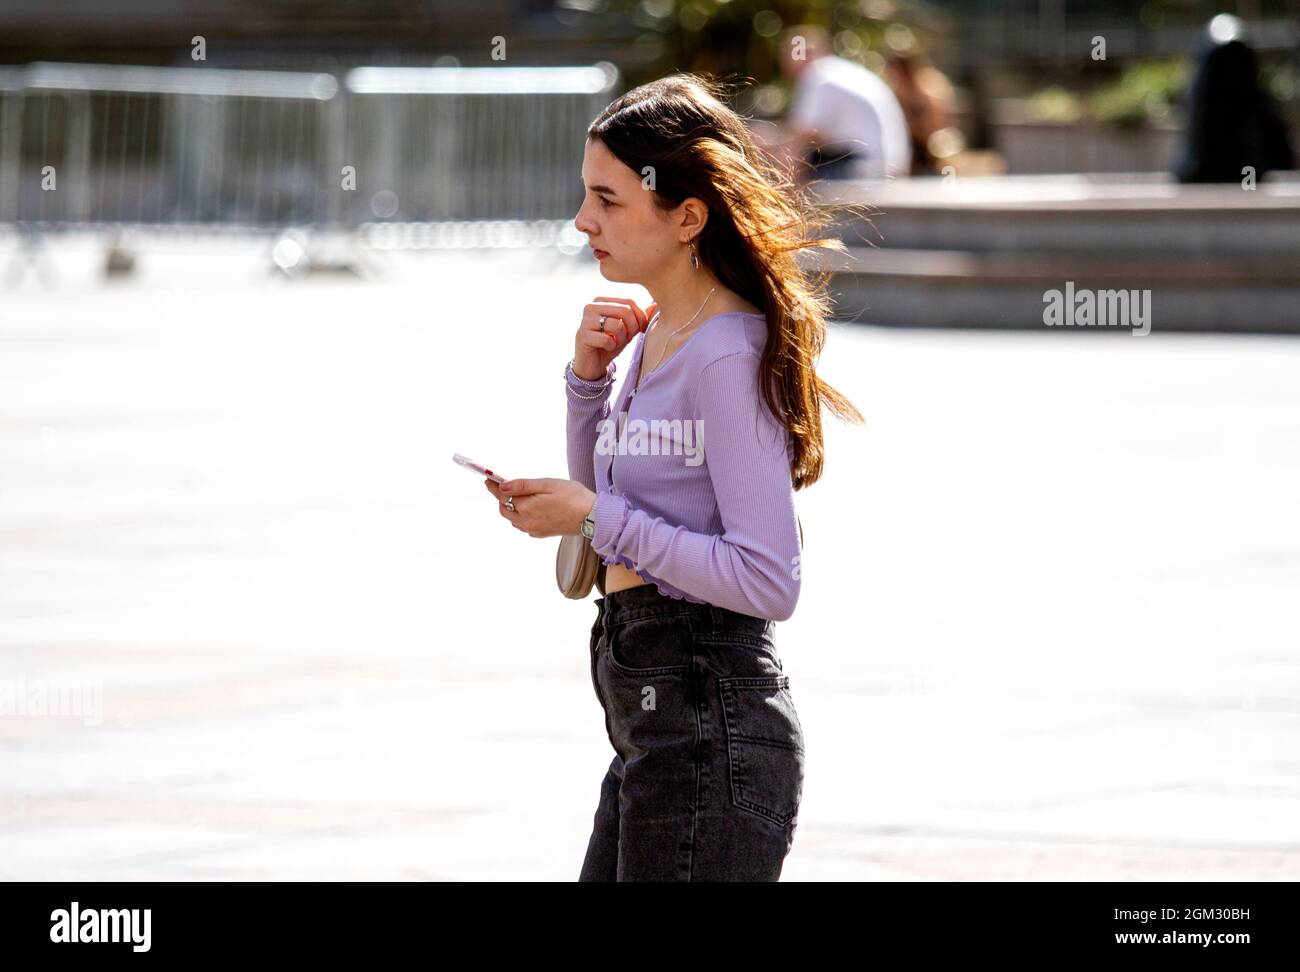 Dundee, Tayside, Scotland, UK. 16th Sep, 2021. UK weather: Warm mid September sunshine across North East Scotland with temperatures reaching 19°C. A young woman spending the day out enjoying the glorious warm sunny weather whilst talking on her mobile phone in Dundee city centre. Credit: Dundee Photographics/Alamy Live News Stock Photo